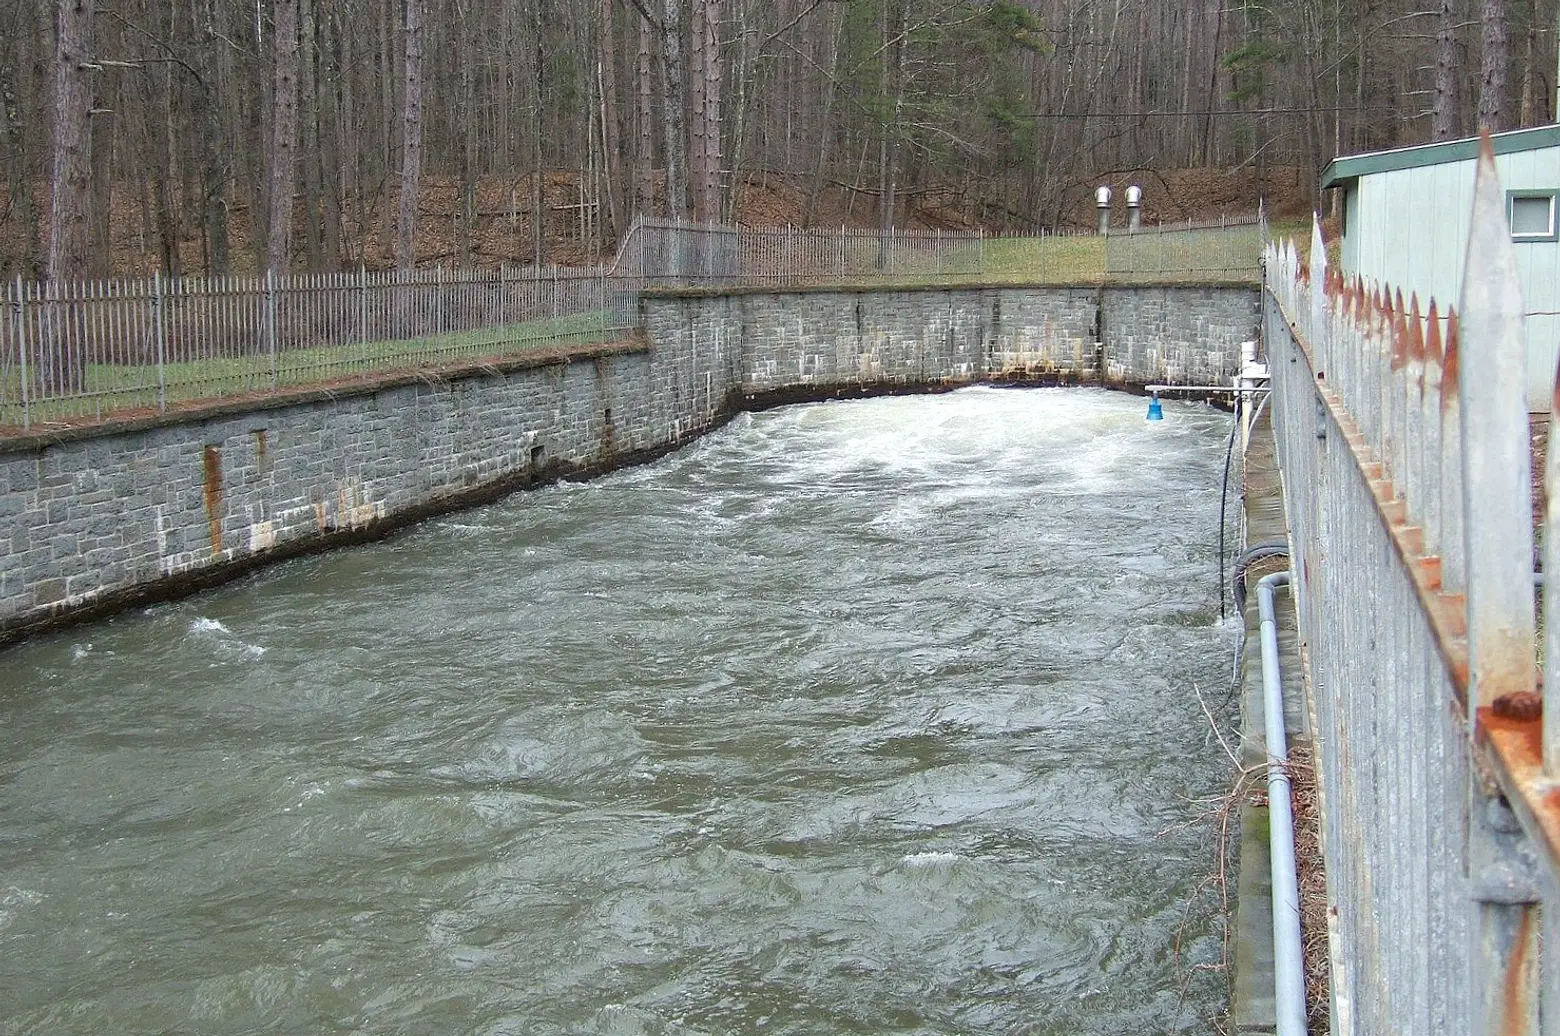 Repairs to New York state’s water infrastructure could cost $40B